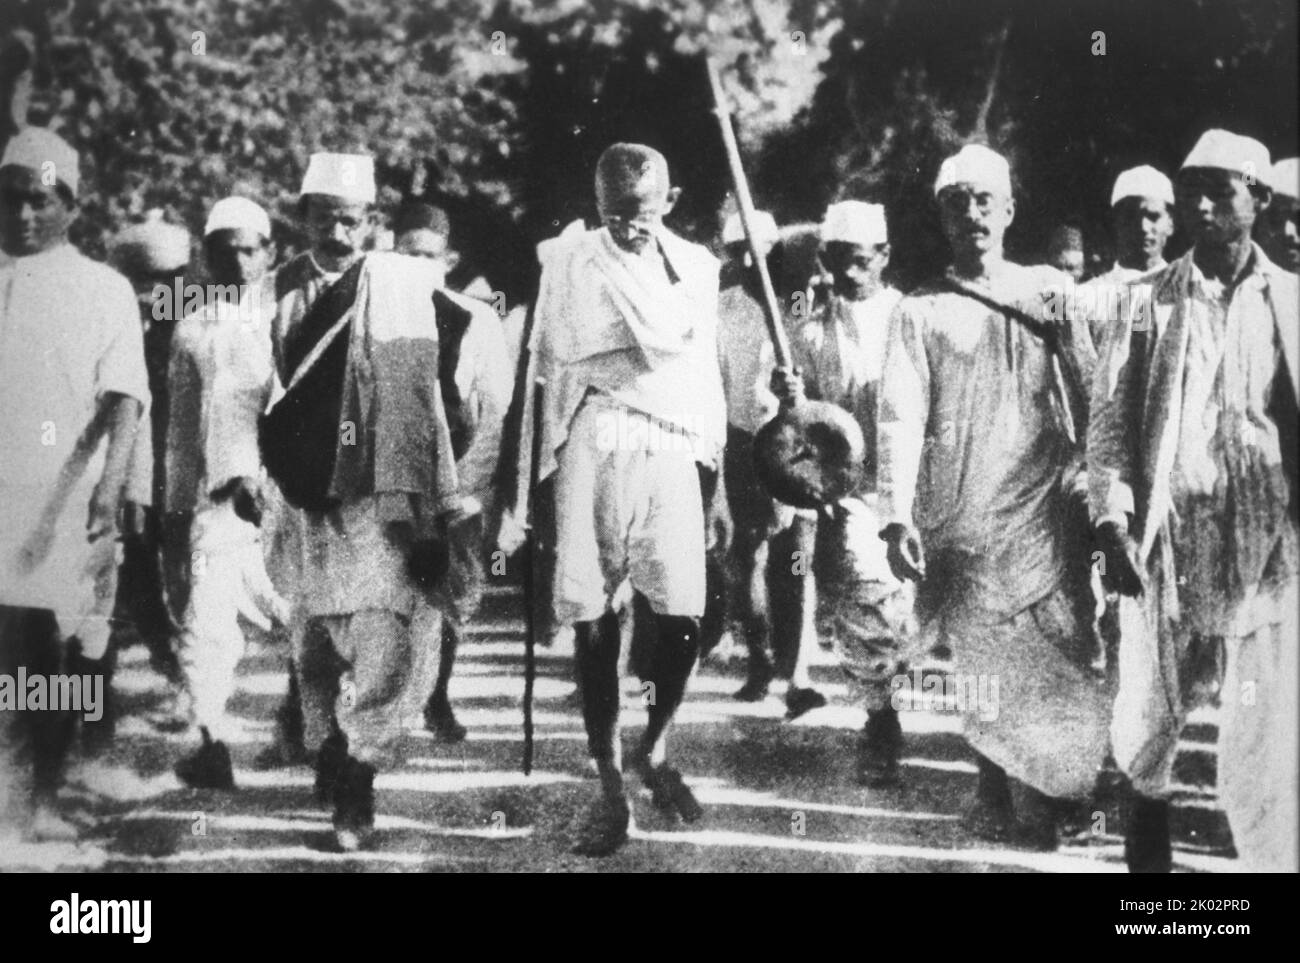 Salt March, also known as the Salt Satyagraha, was an act of nonviolent civil disobedience in colonial India led by Mohandas Karamchand Gandhi. The 24-day march lasted from 12 March 1930 to 6 April 1930 as a direct action campaign of tax resistance and no Stock Photo